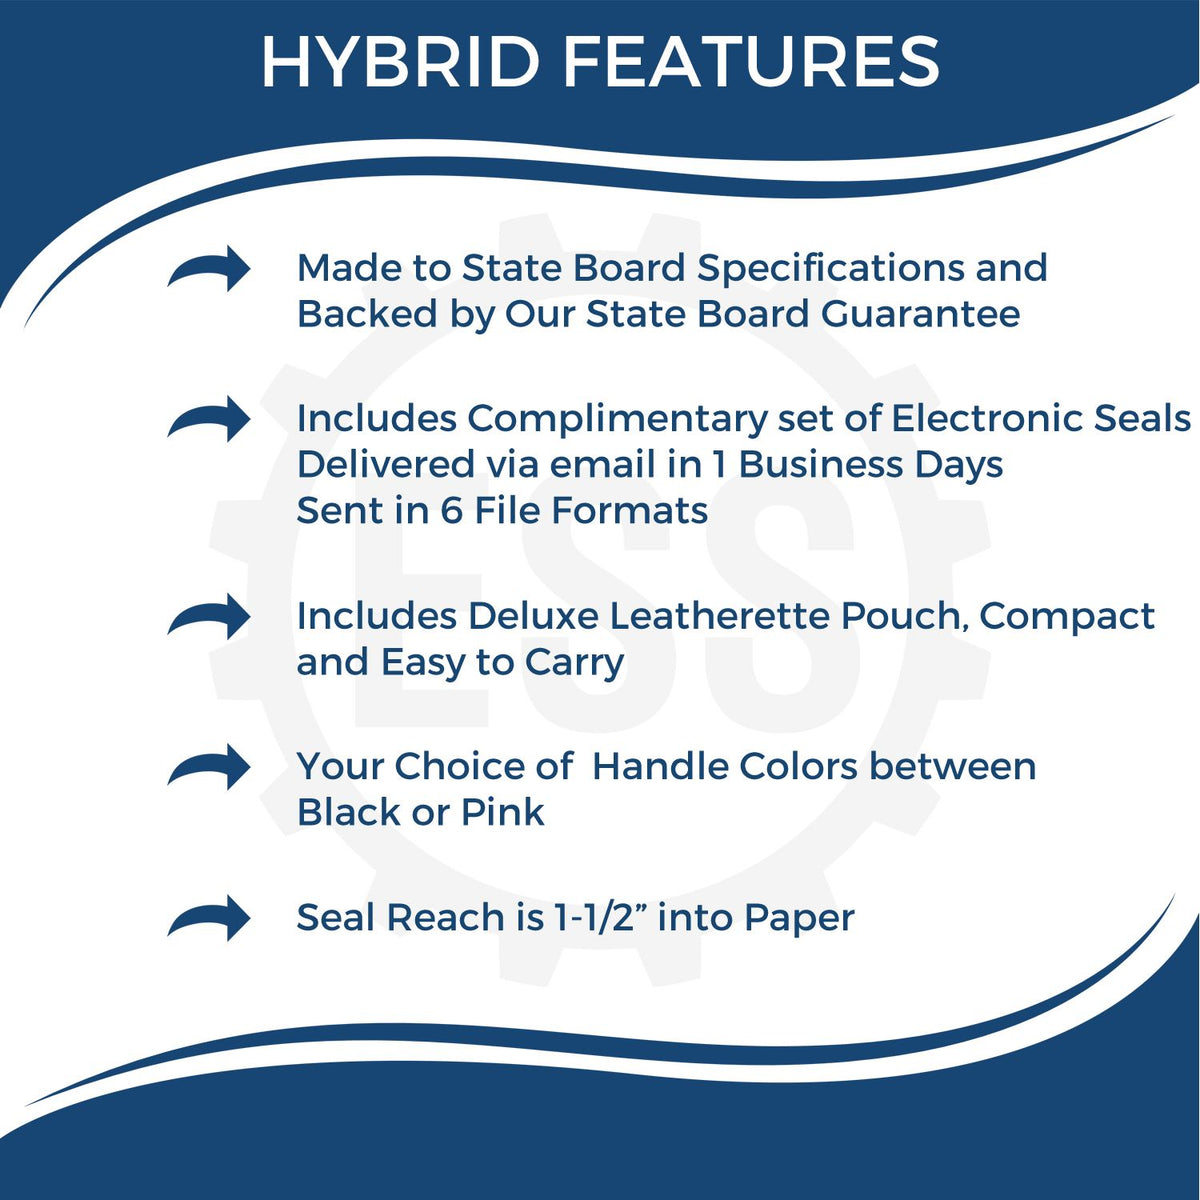 A picture of an infographic highlighting the selling points for the Hybrid Iowa Architect Seal